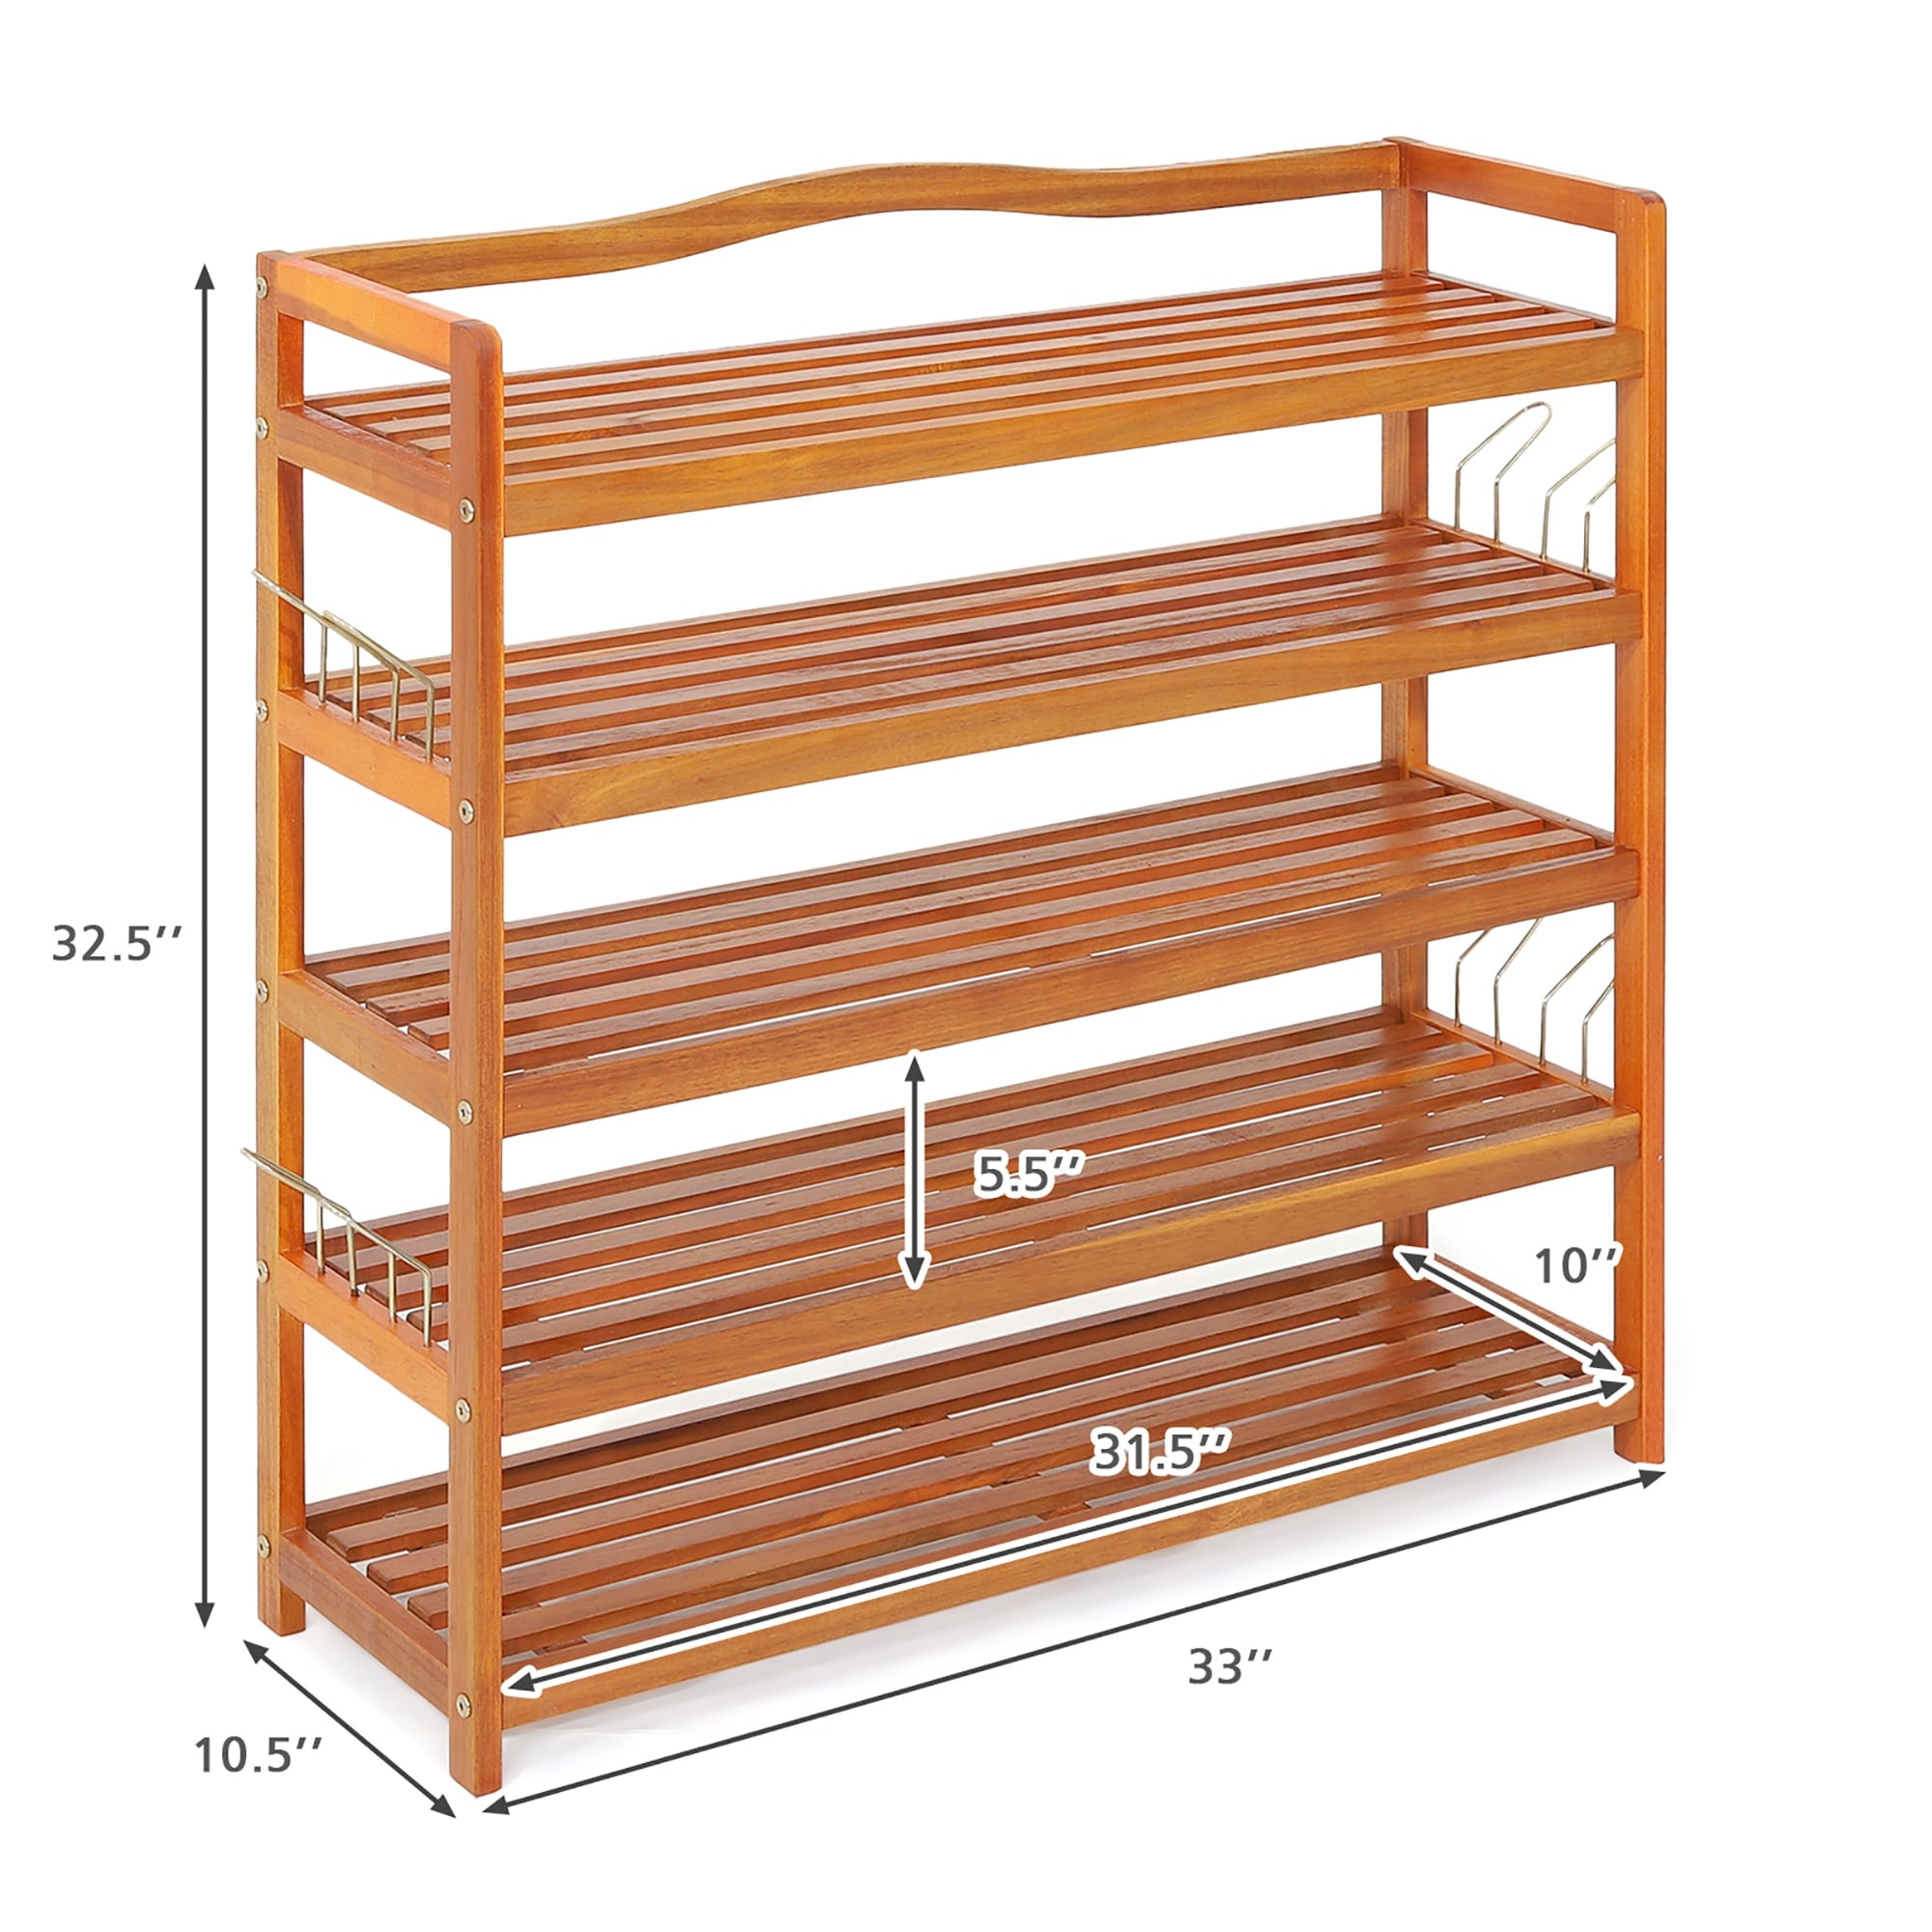 https://ak1.ostkcdn.com/images/products/is/images/direct/d7cf757bf8dbcedb130dff4dbf708dff7037ede5/Costway-5-Tier-Wood-Shoe-Rack-Freestanding-Large-Shoe-Storage.jpg